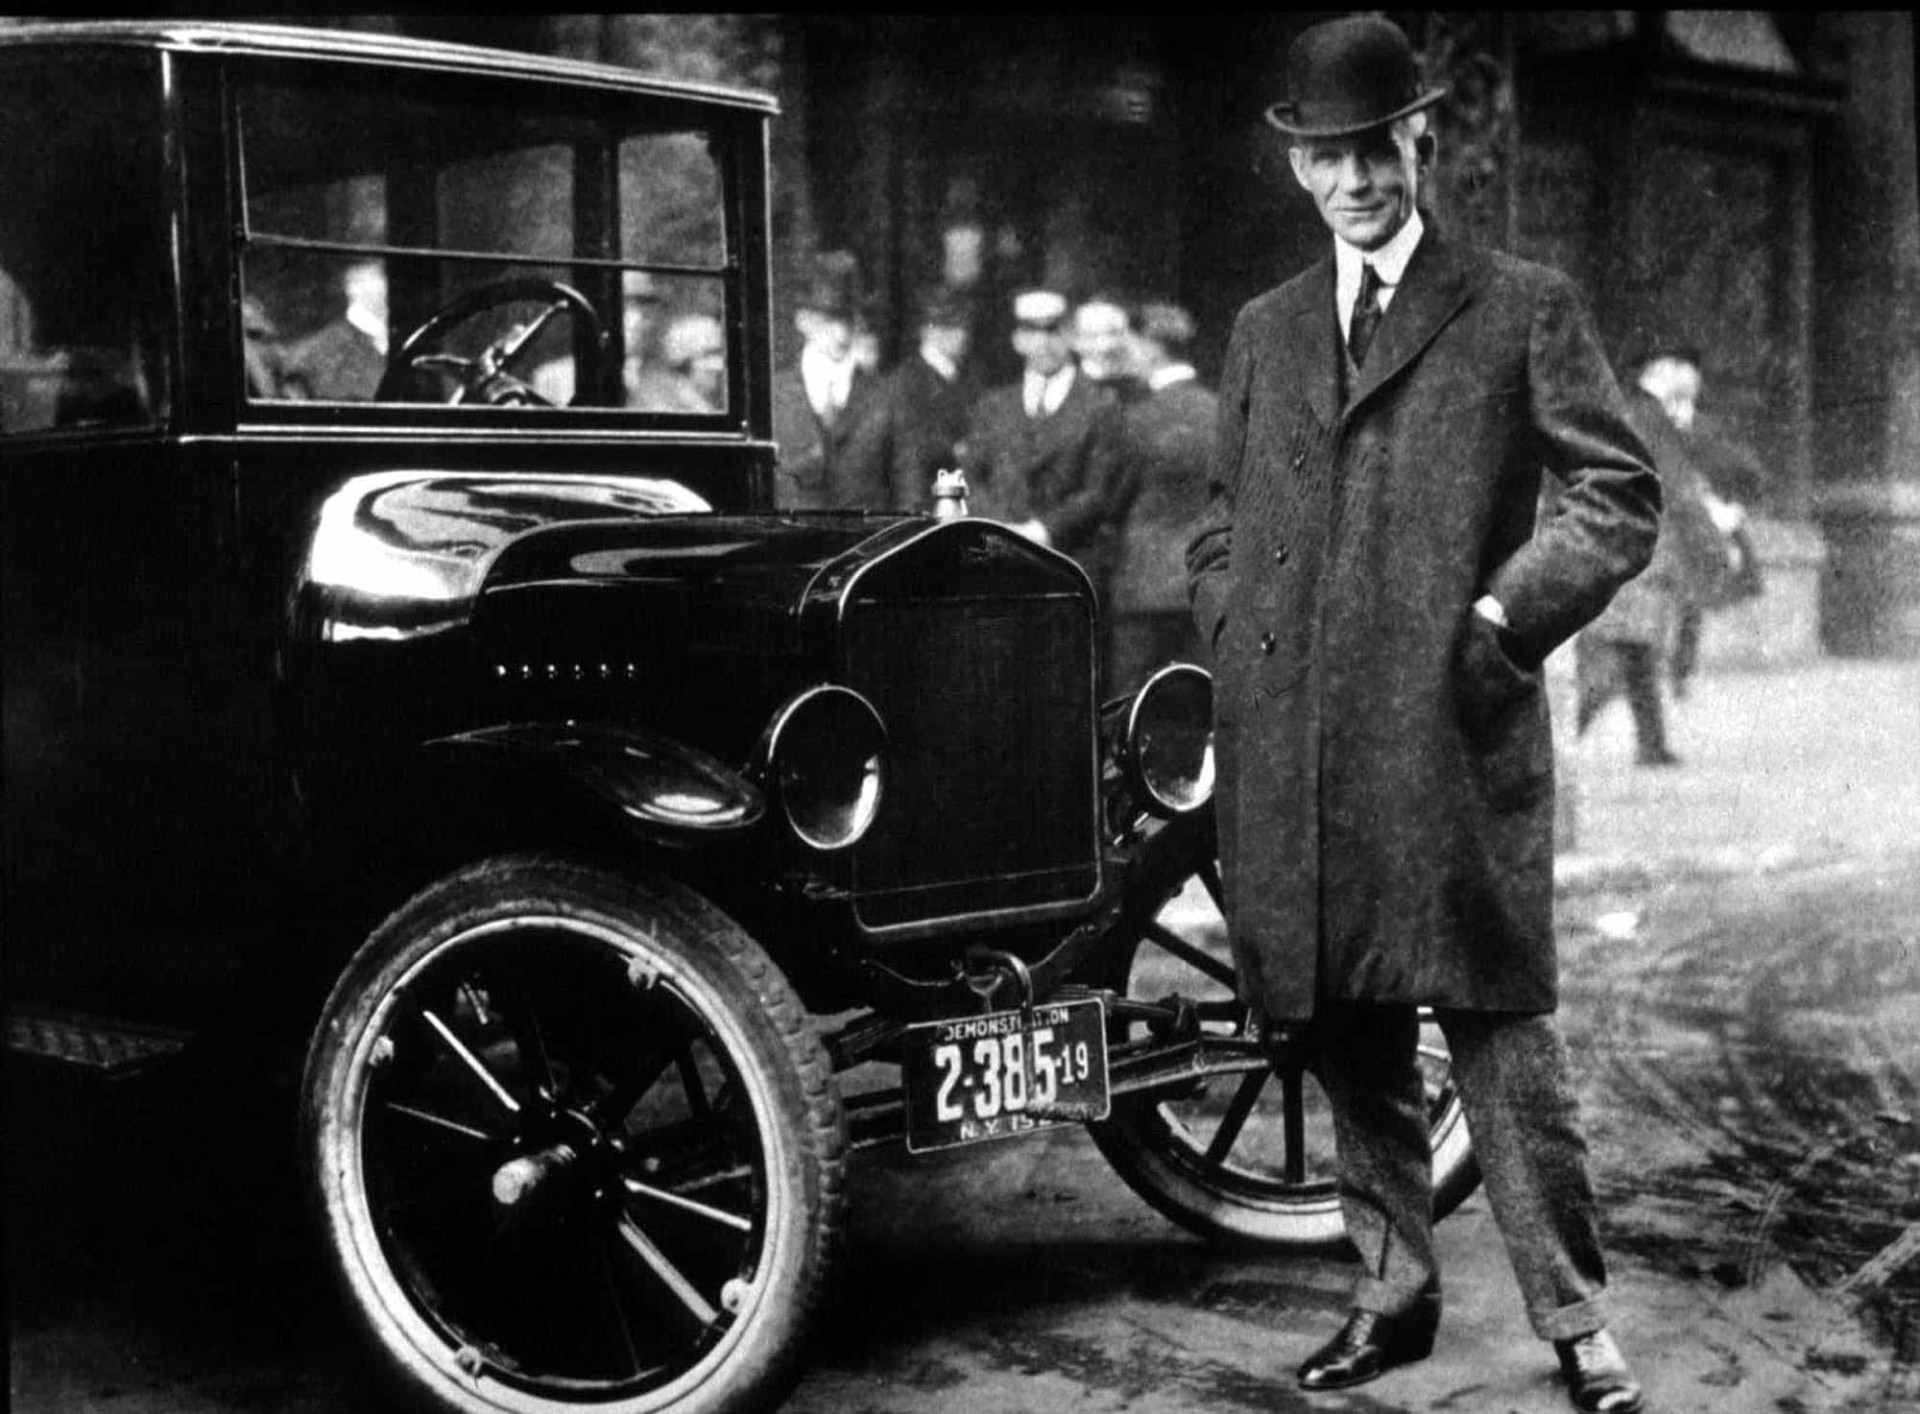 <p>With Henry Ford’s mass production of the Model T in 1914, individuals had more freedom to travel. It was a revolution when it came to transportation.</p><p>You may also like:<a href="https://www.starsinsider.com/n/174379?utm_source=msn.com&utm_medium=display&utm_campaign=referral_description&utm_content=504073en-us"> Facts you couldn't have imagined about Thomas Edison</a></p>